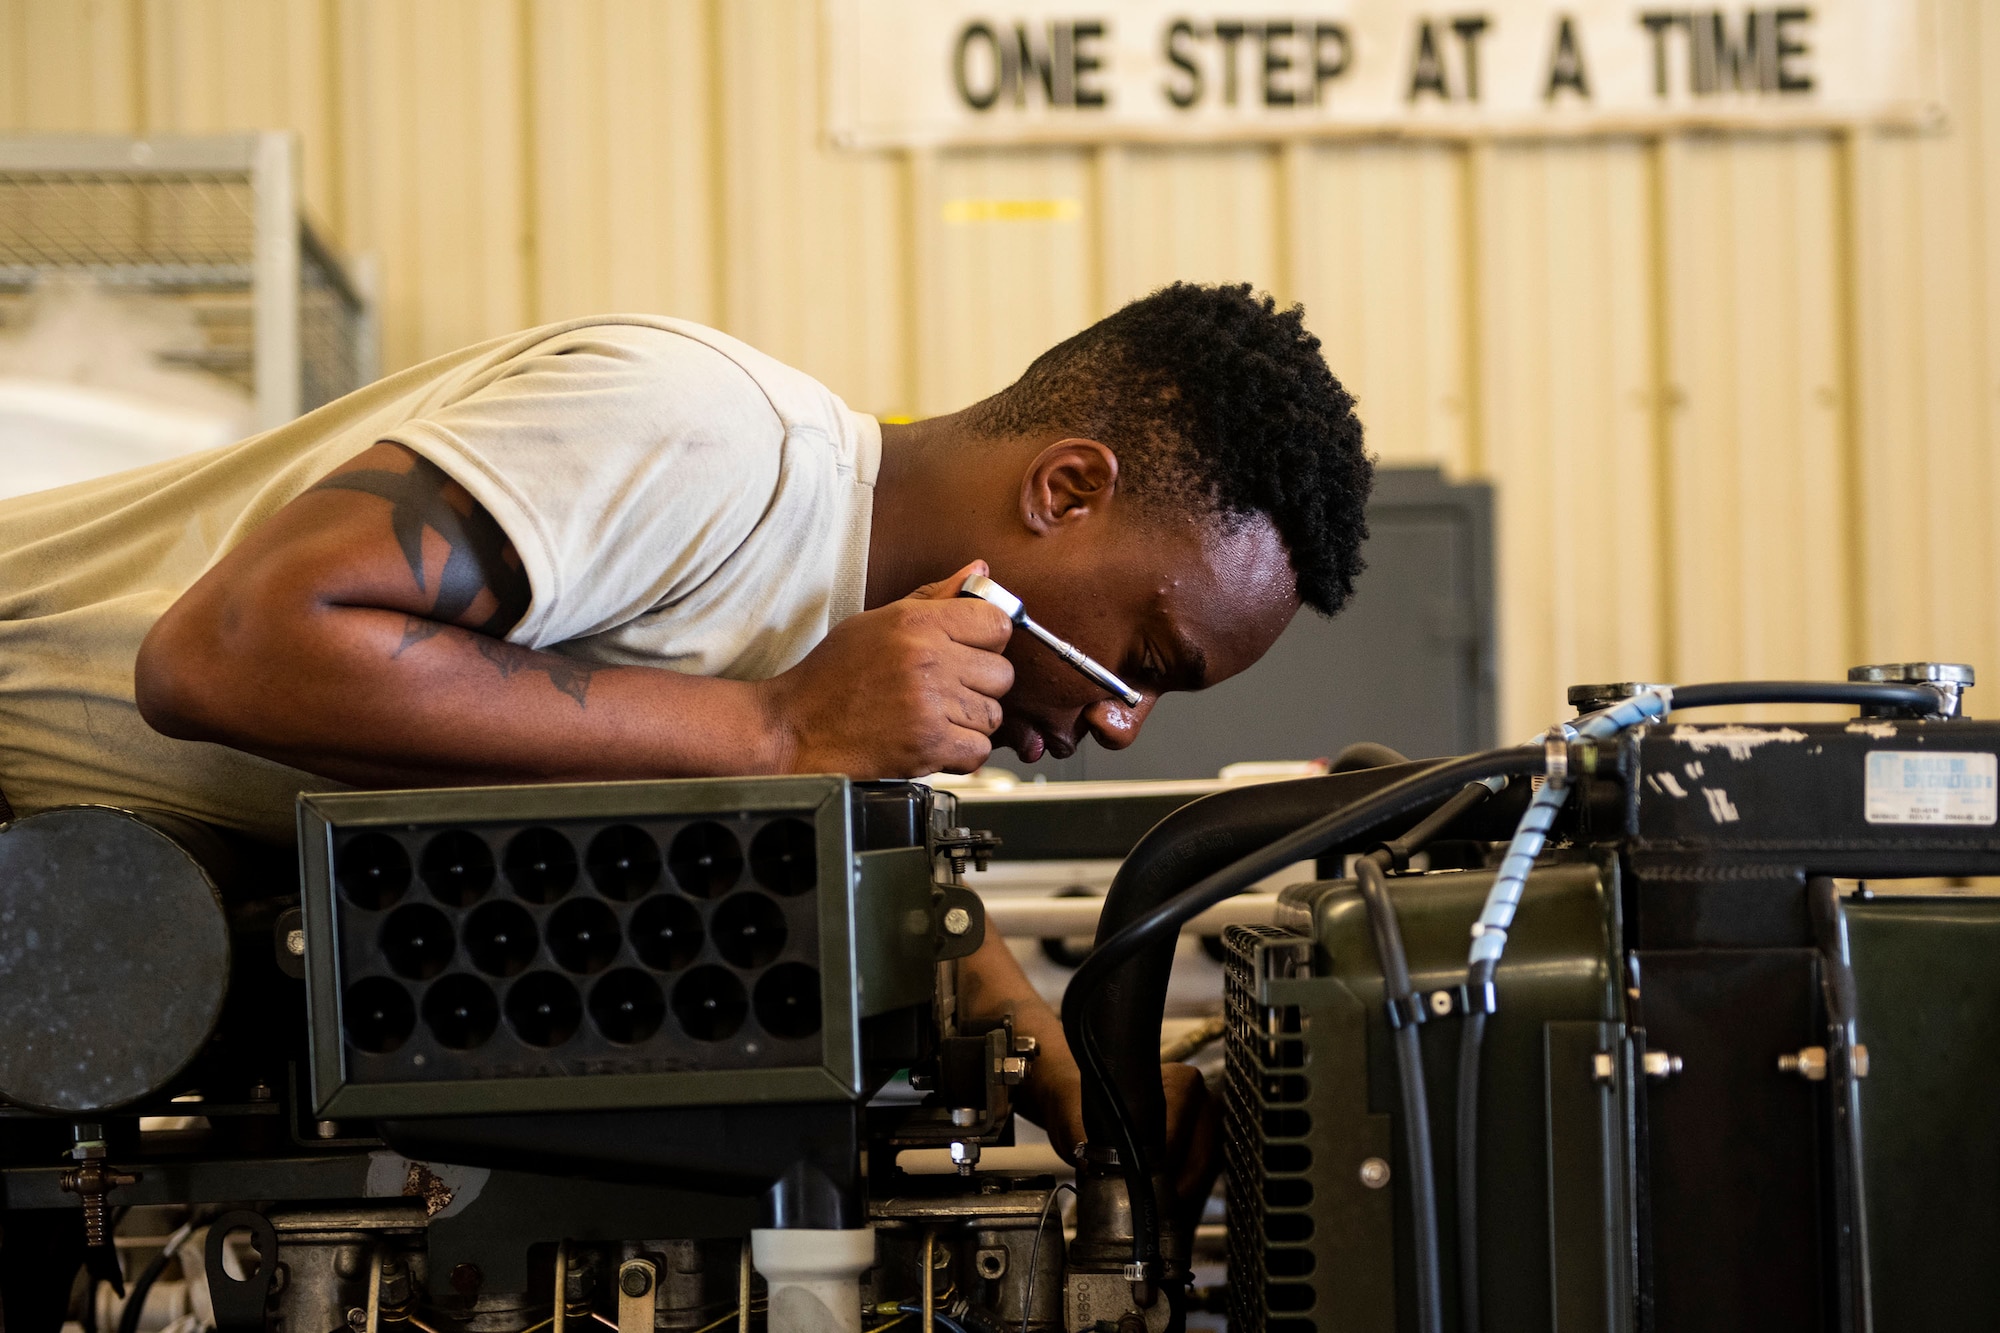 Airman 1st Class Davon Frazier, 23d Maintenance Squadron aerospace ground equipment (AGE) journeyman, performs repairs on a self-generating nitrogen servicing cart, June 21, 2019, at Moody Air Force Base, Ga. AGE maintains the equipment needed to repair the three airframes in the 23d Wing. To accomplish this, AGE is broken down into three main functions: inspections, maintenance and dispatch. The maintenance section troubleshoots and repairs the equipment the dispatch section can’t readily fix out on the flightline. The maintenance section averages approximately 800 jobs a month. (U.S. Air Force photo by Senior Airman Erick Requadt)